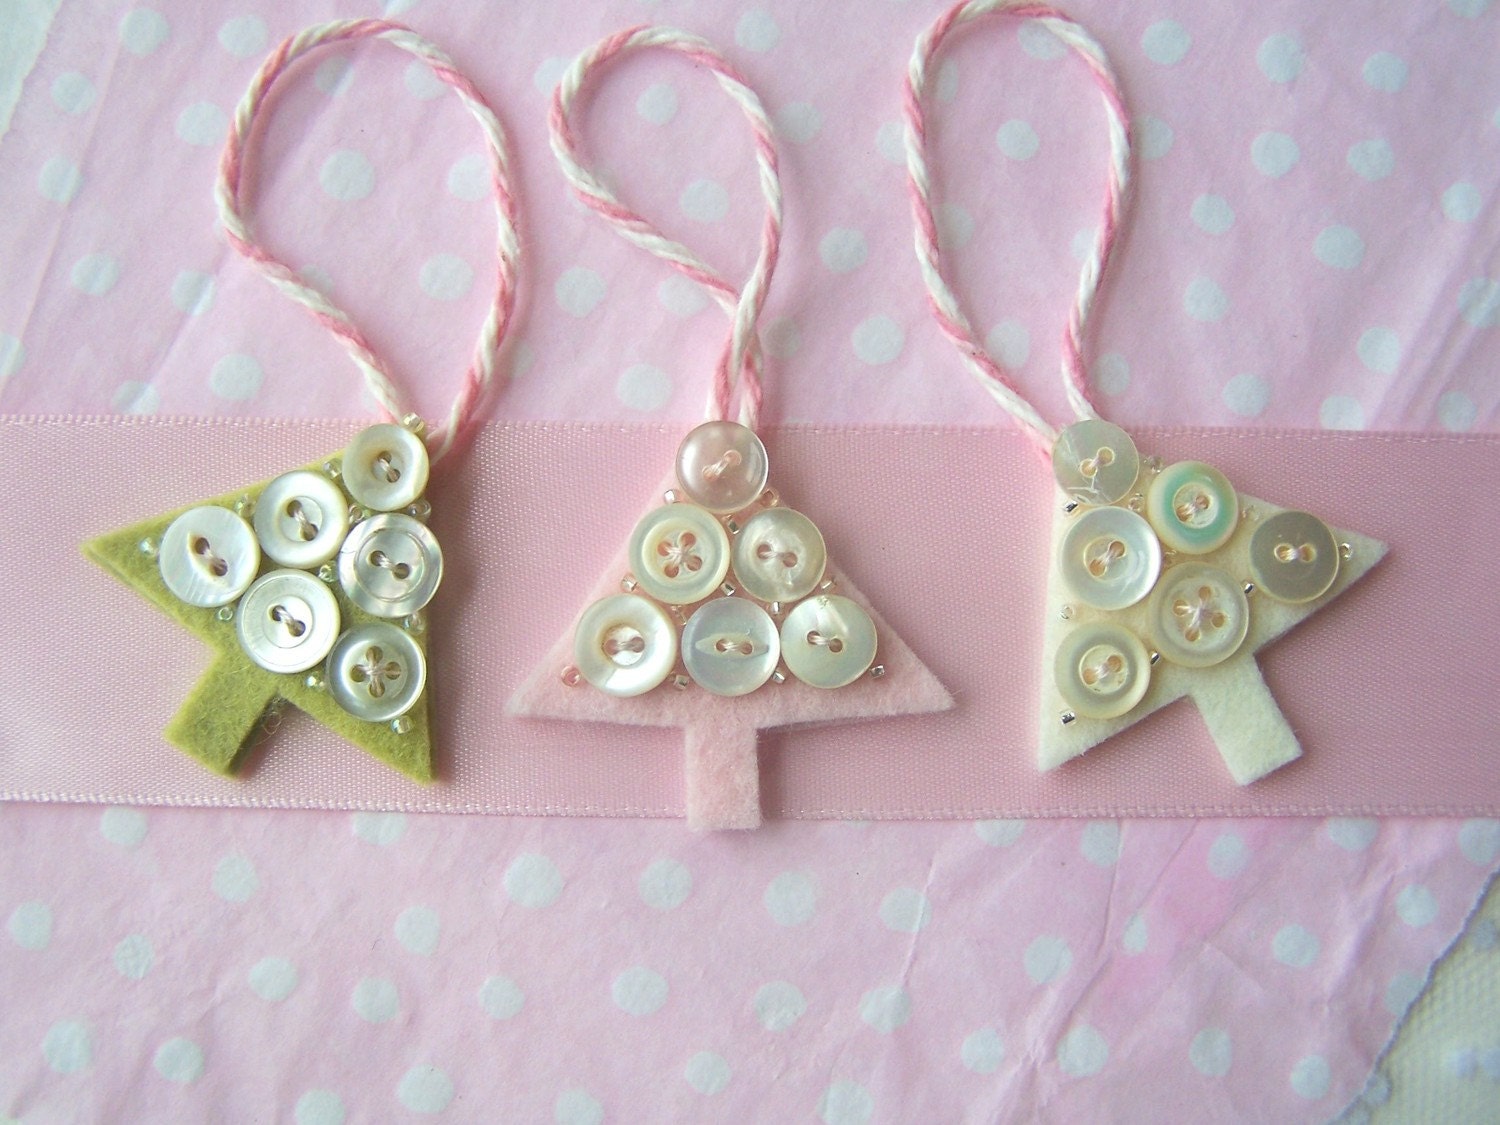 Christmas Tree Ornament Set of Three Mini Merino Wool Felt Trees in Pink, Green and White with Vintage Buttons